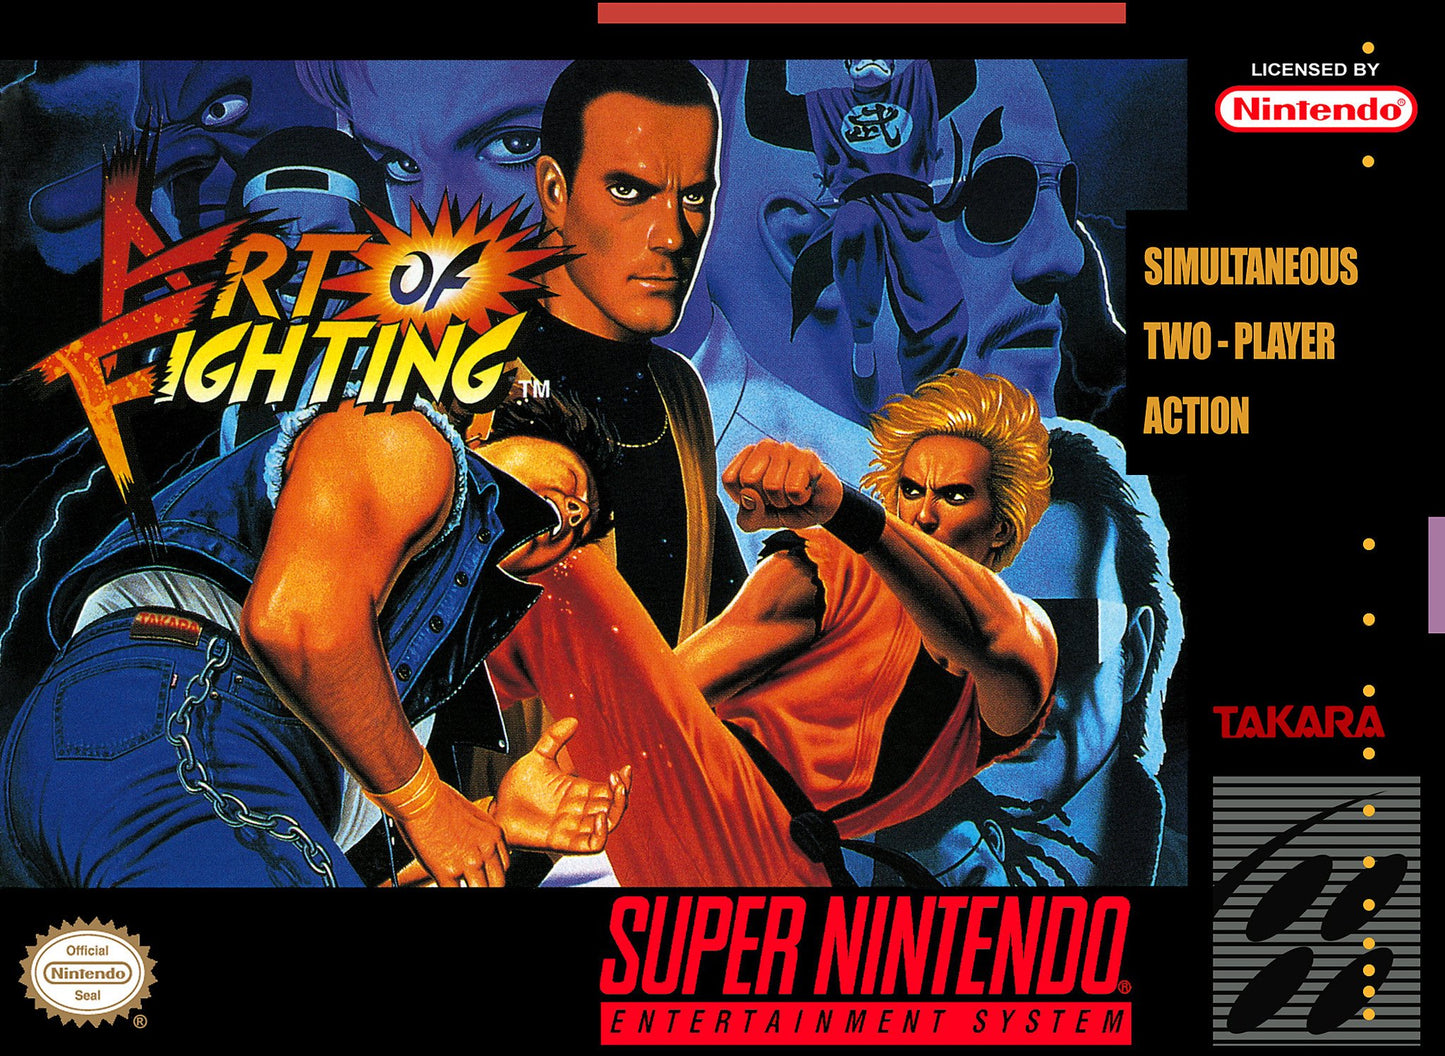 J2Games.com | Art of Fighting (Super Nintendo) (Pre-Played - Game Only).